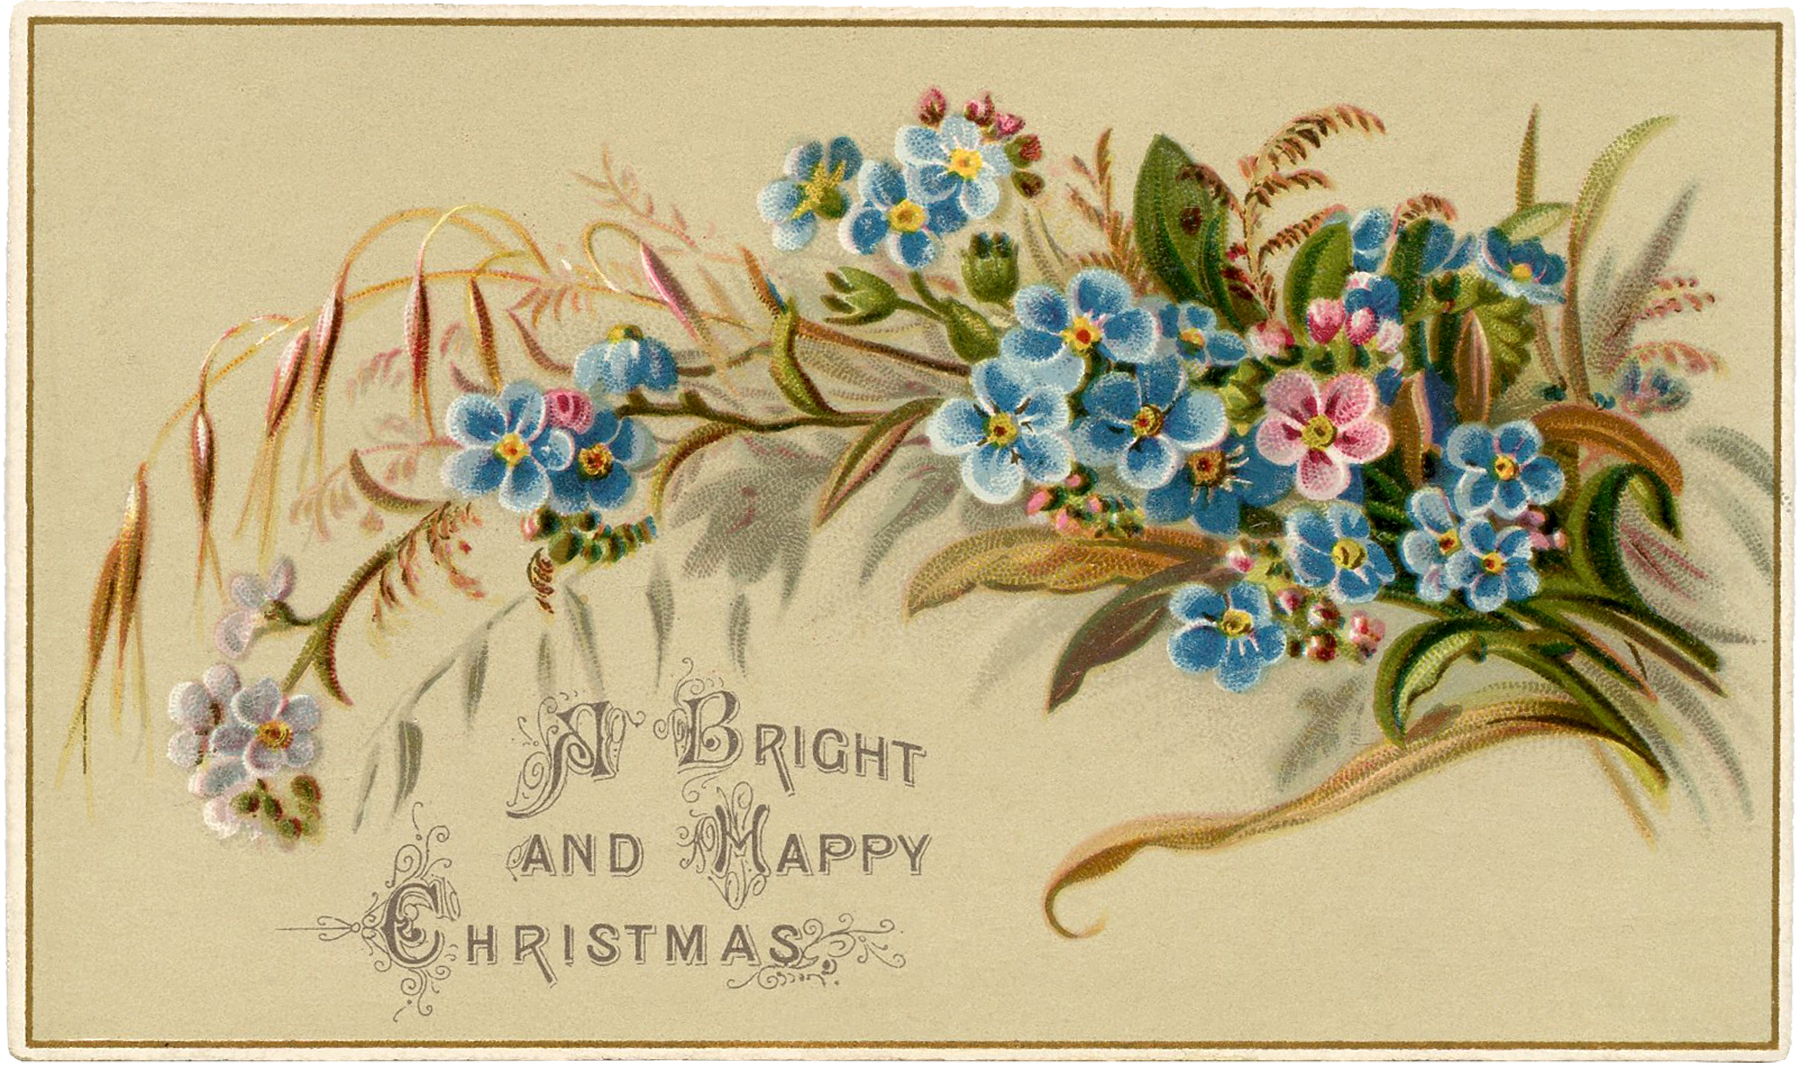 Vintage Floral Christmas Card! - The Graphics Fairy